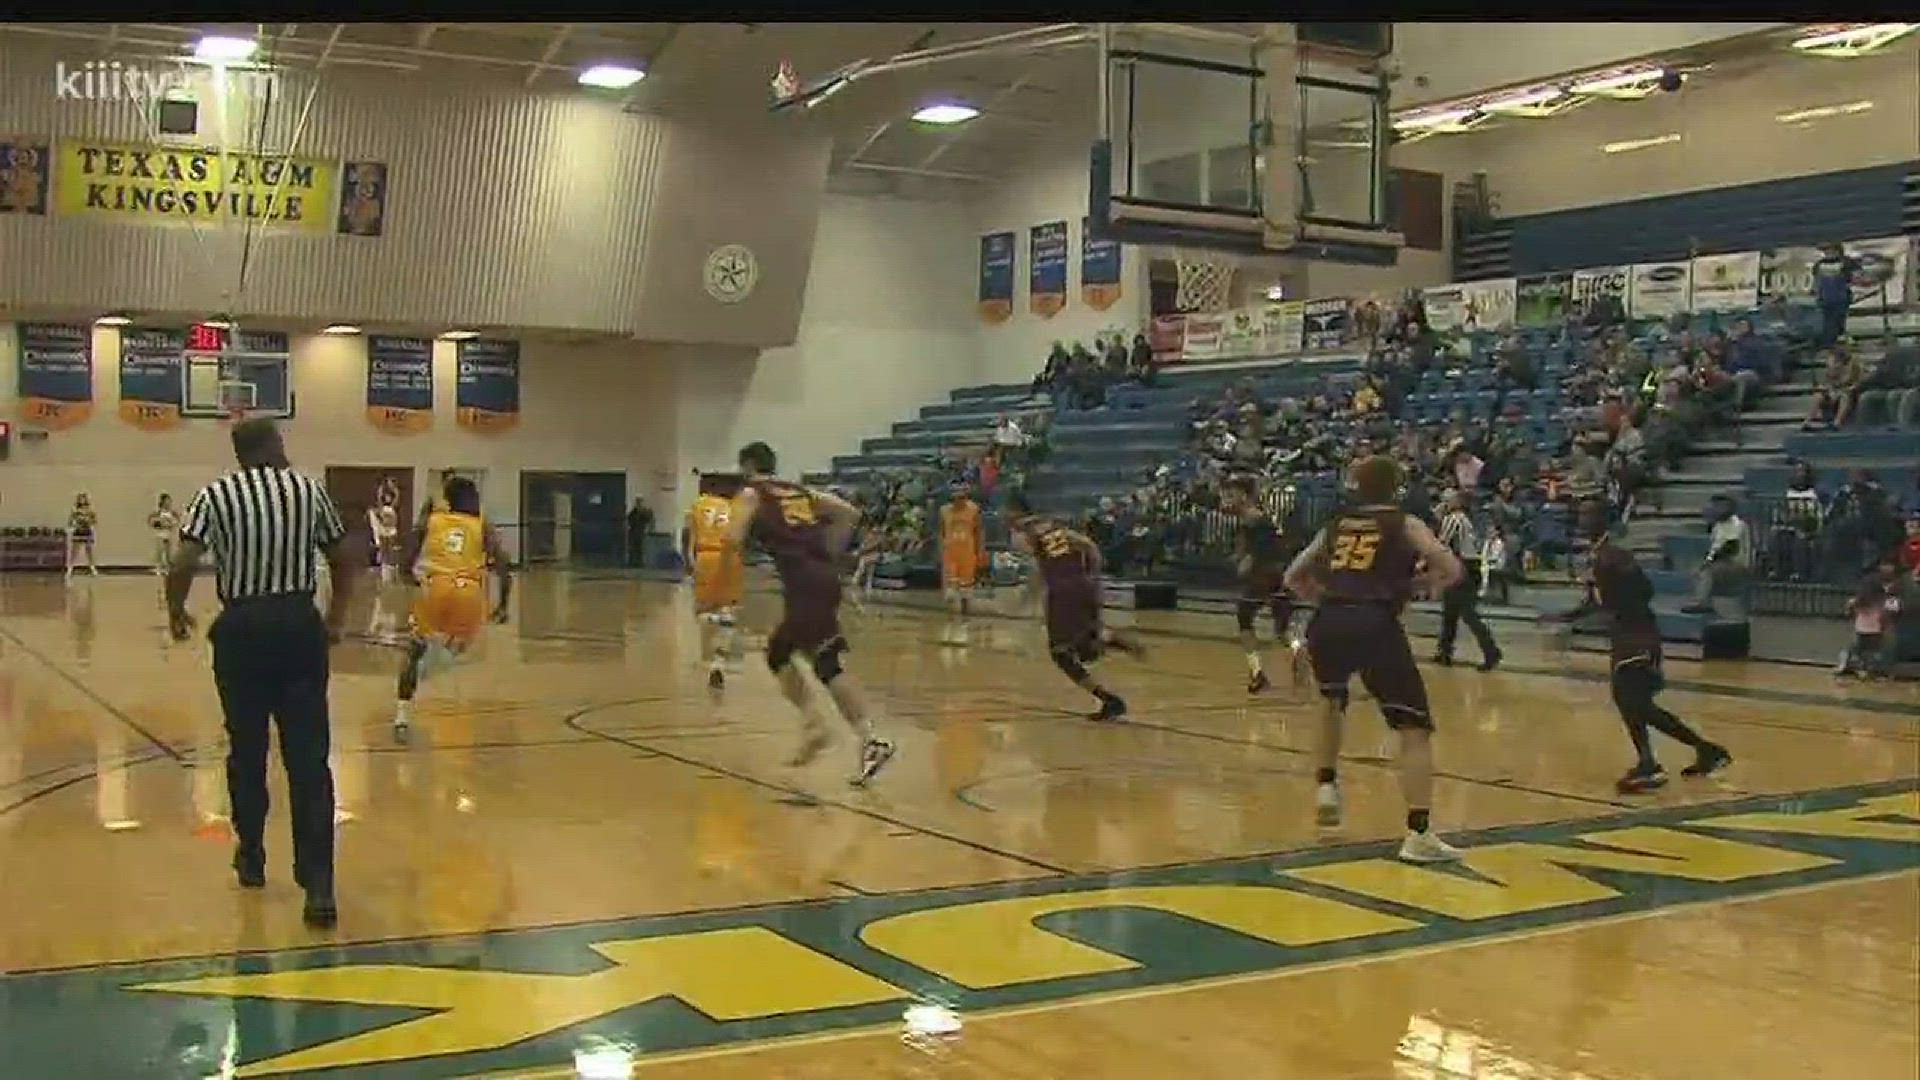 Texas A&M-Kingsville men's basketball dropped it's third consecutive game with the 72-68 loss to Midwestern State.